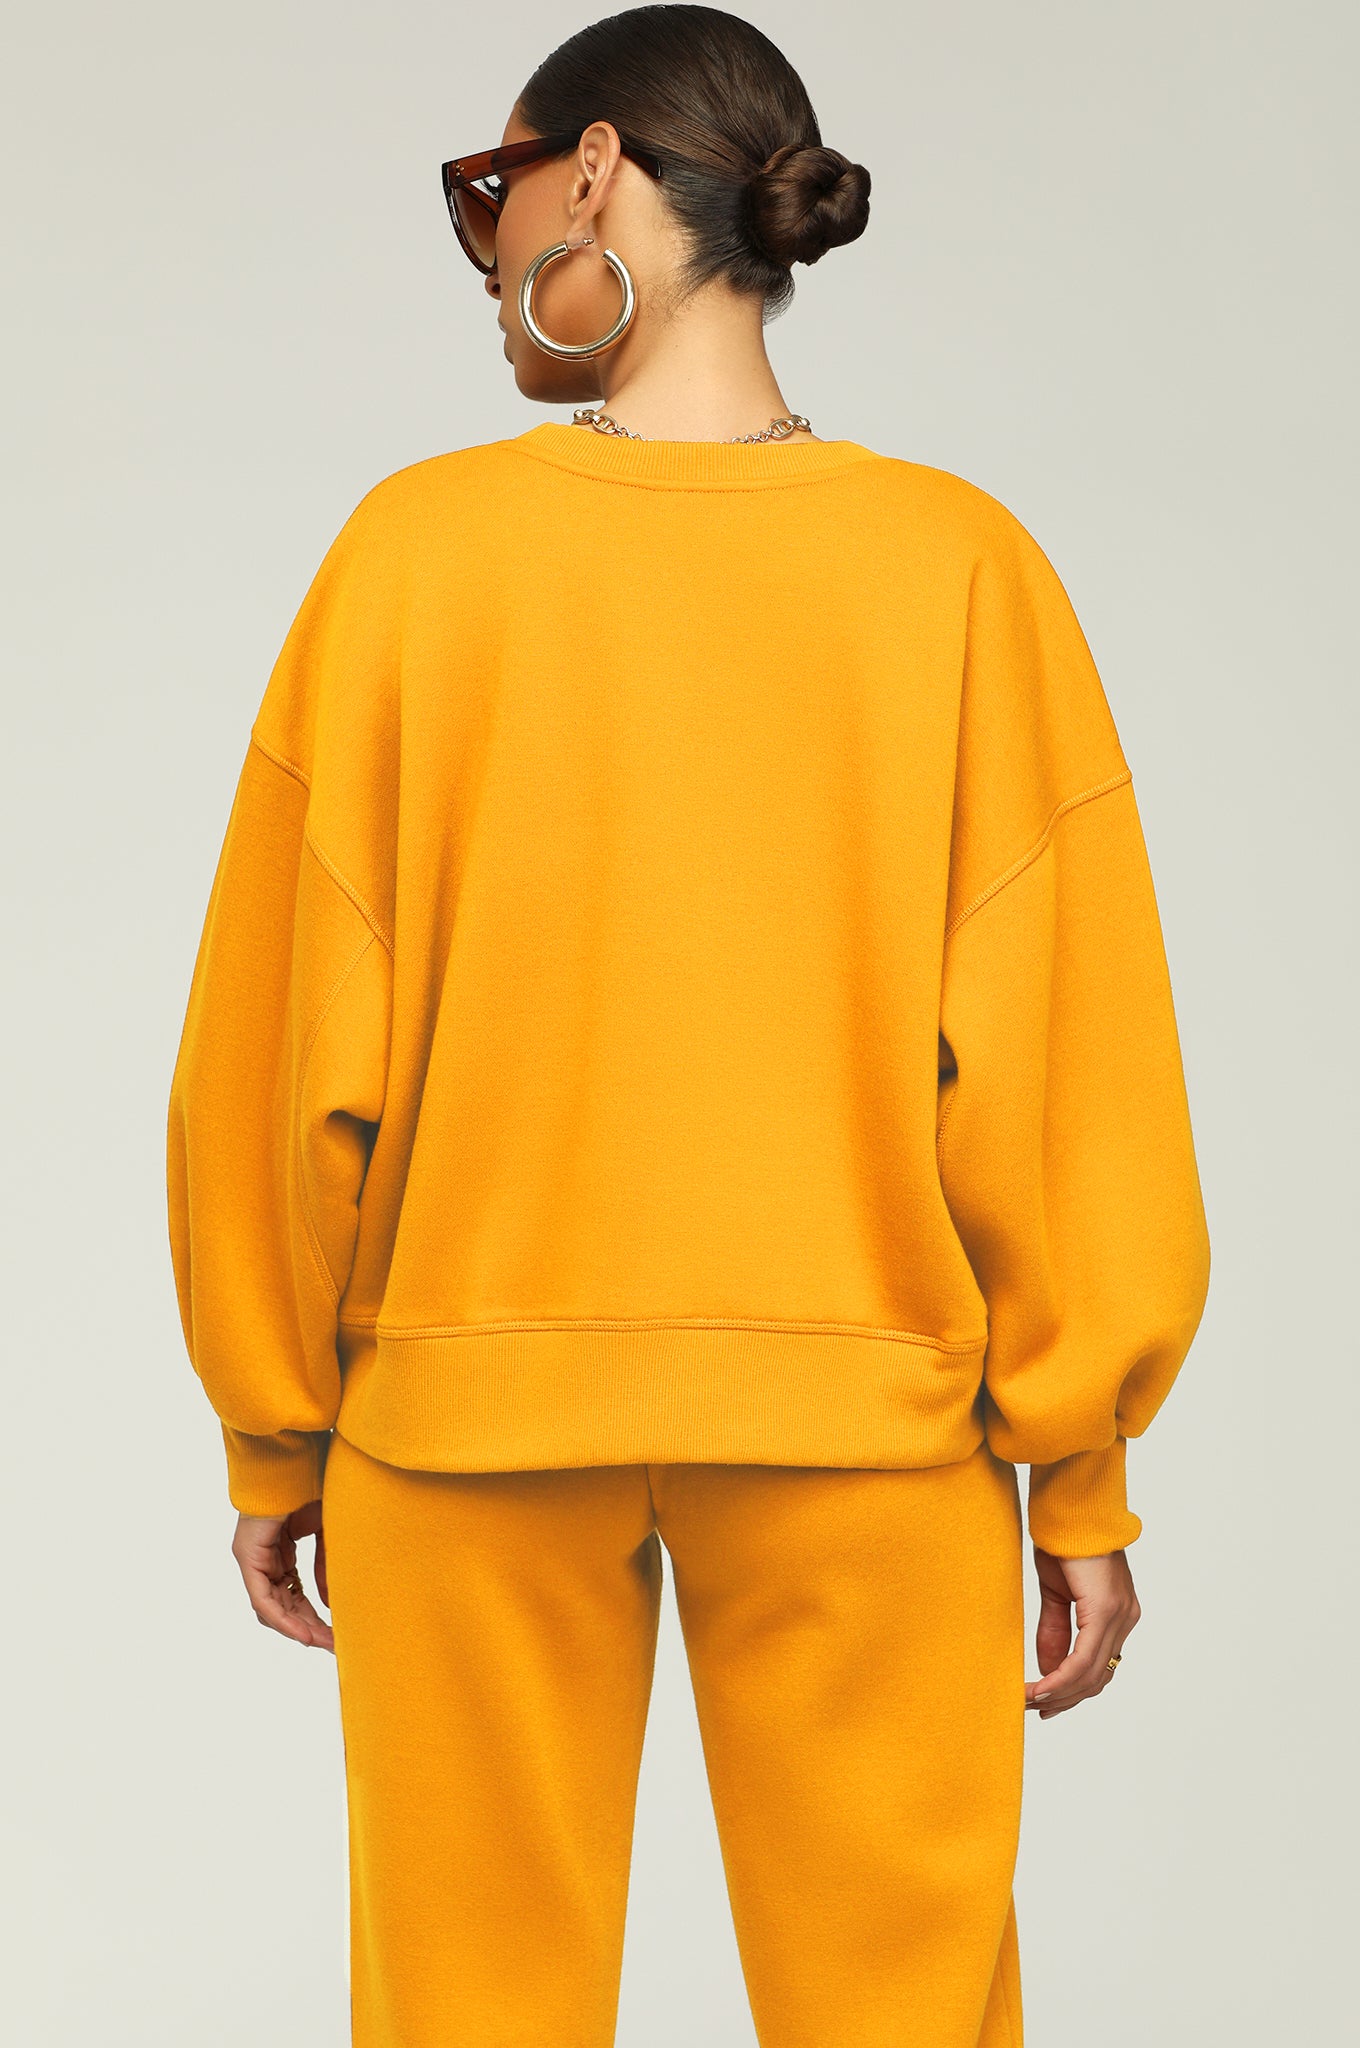 ALL ABOUT COMFORT SET [PRE-ORDER 10/20]